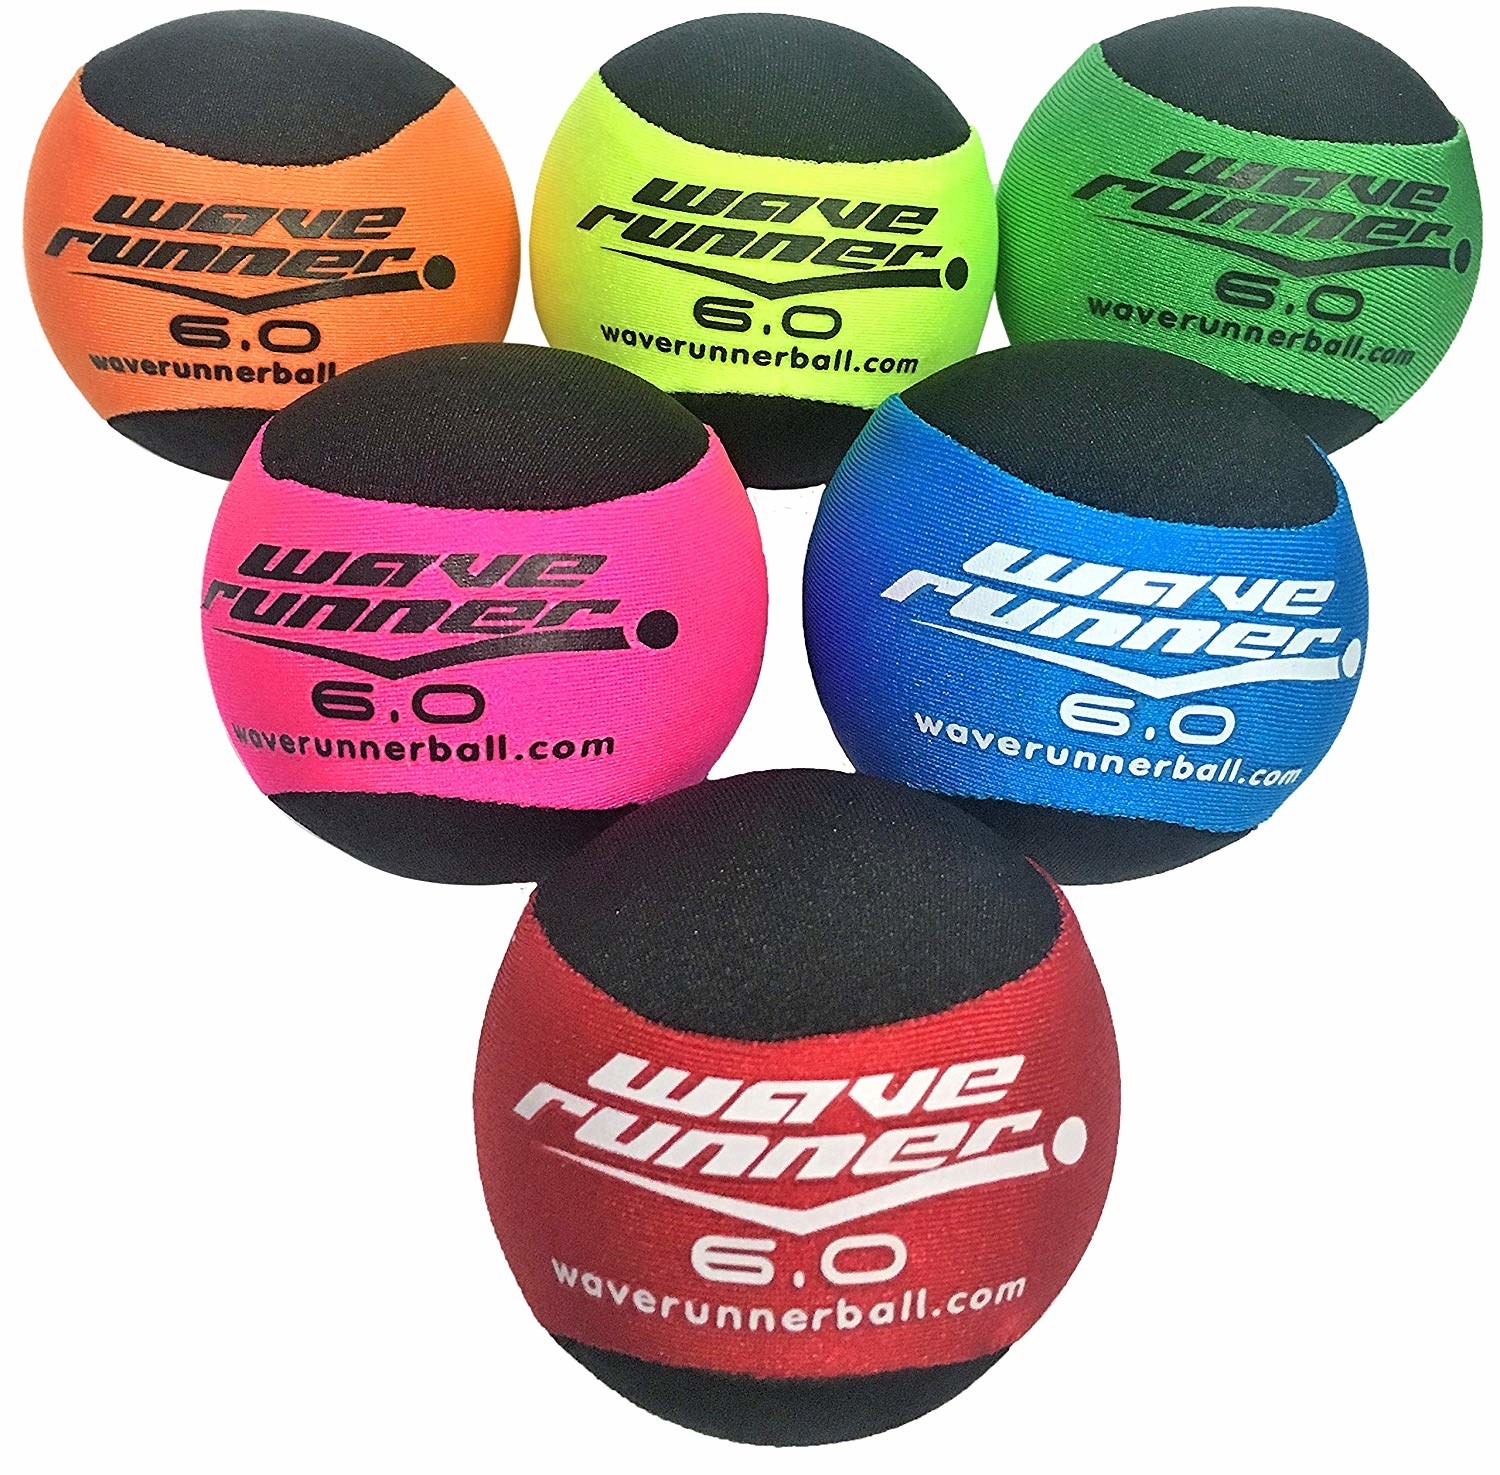 six of the balls in various colors